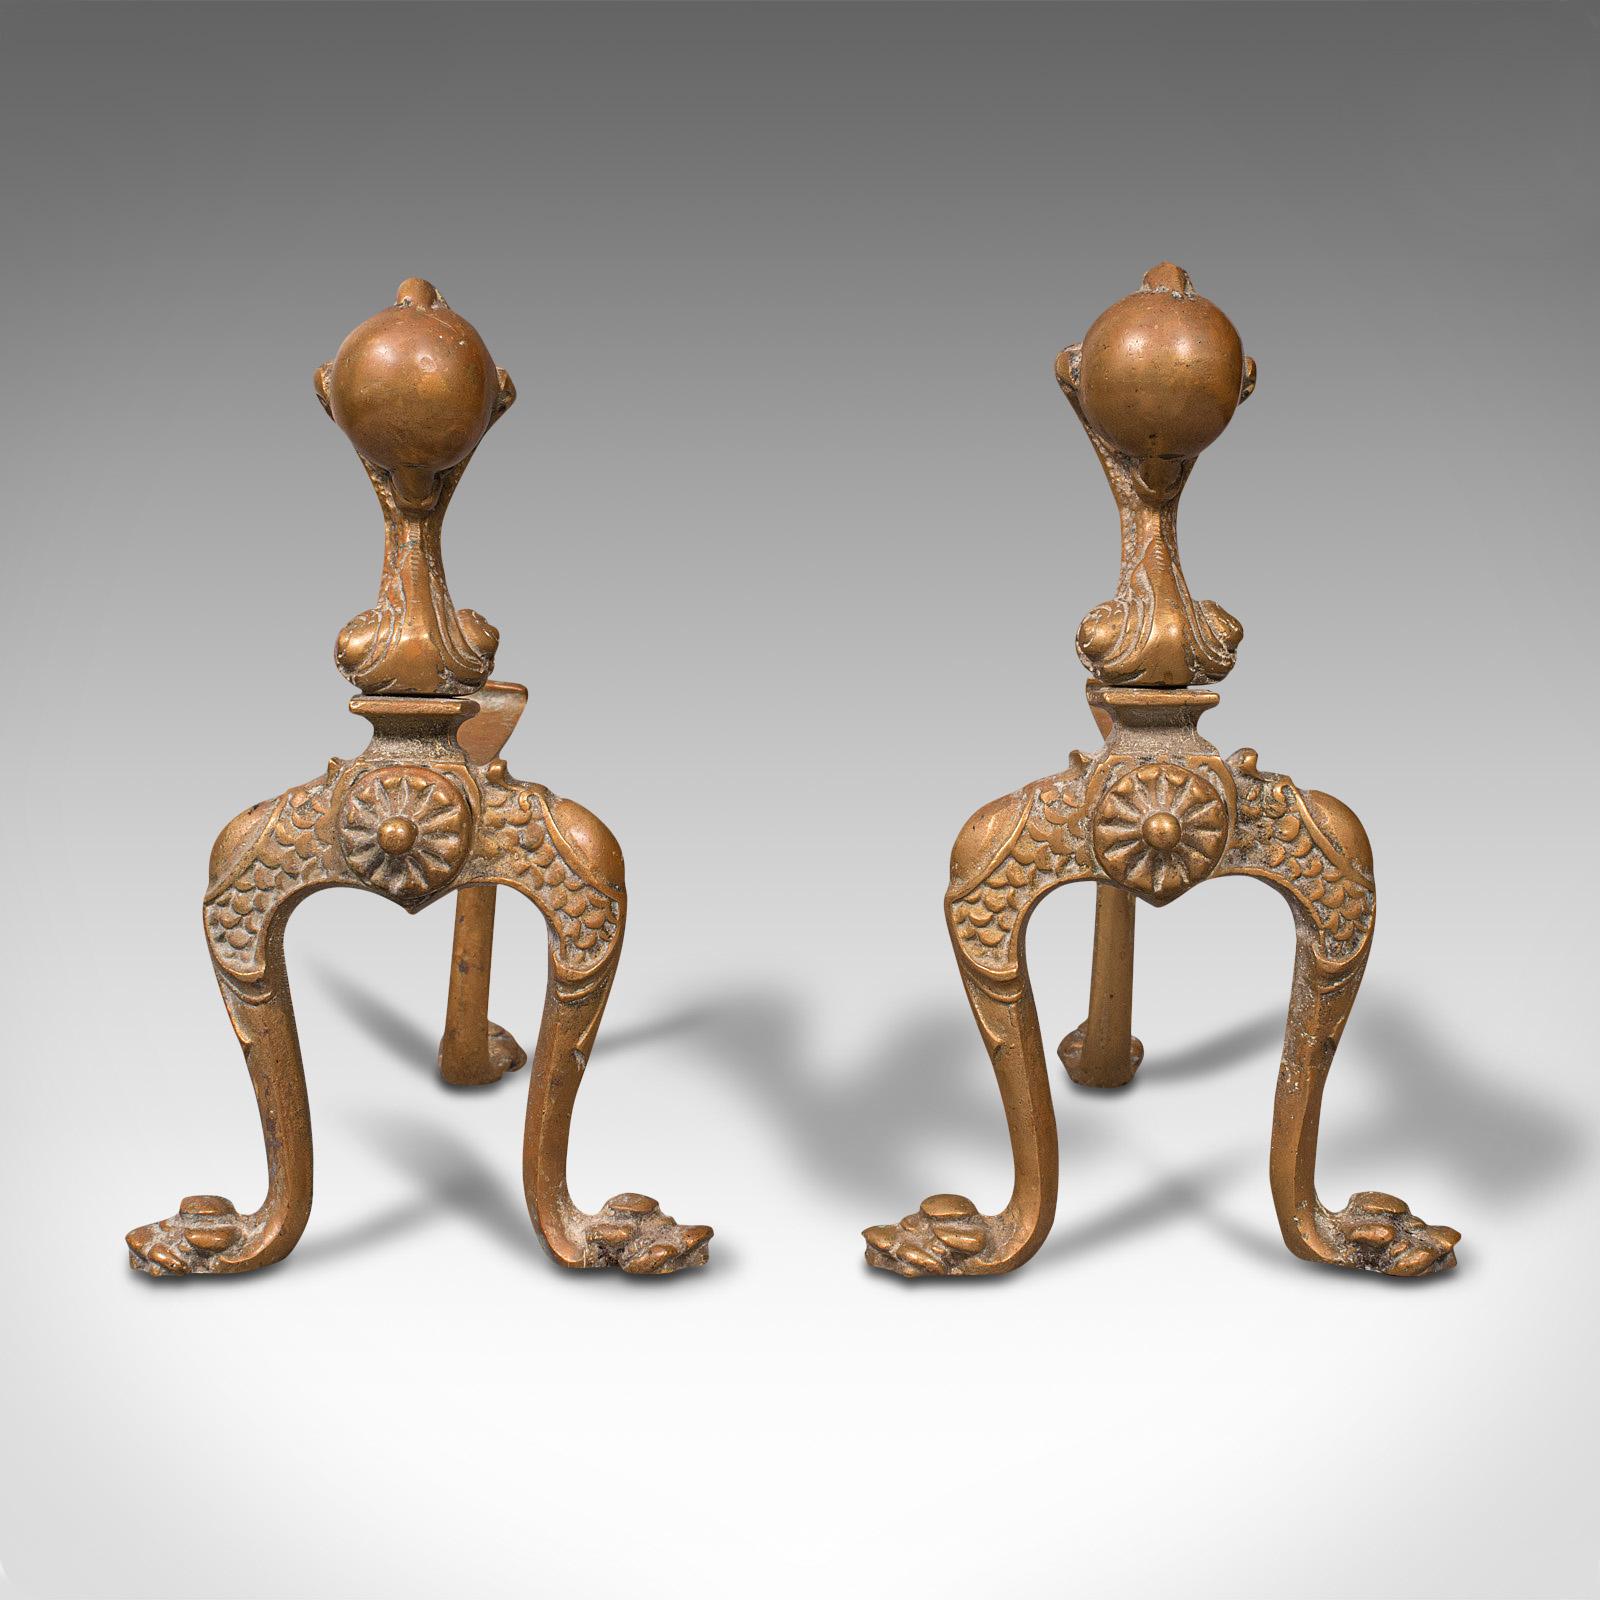 This is a pair of antique decorative fireside tool rests. A French, brass andiron or fire dog, dating to the Victorian period, circa 1880.

Striking decorative appeal and great colour
Displaying a desirable aged patina
Lightly weathered brass